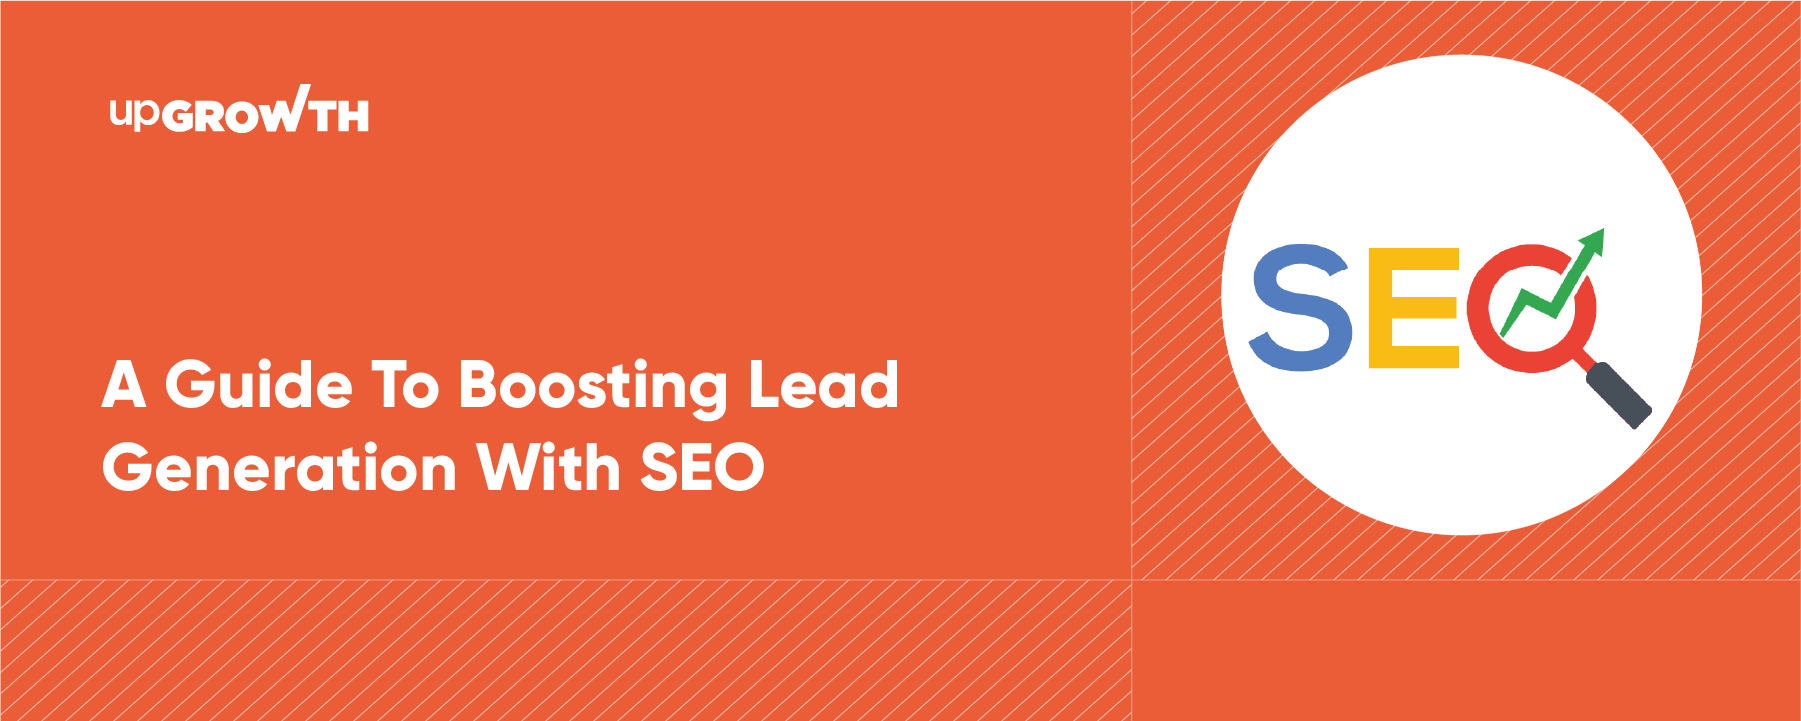 Boosting Lead Generation with SEO